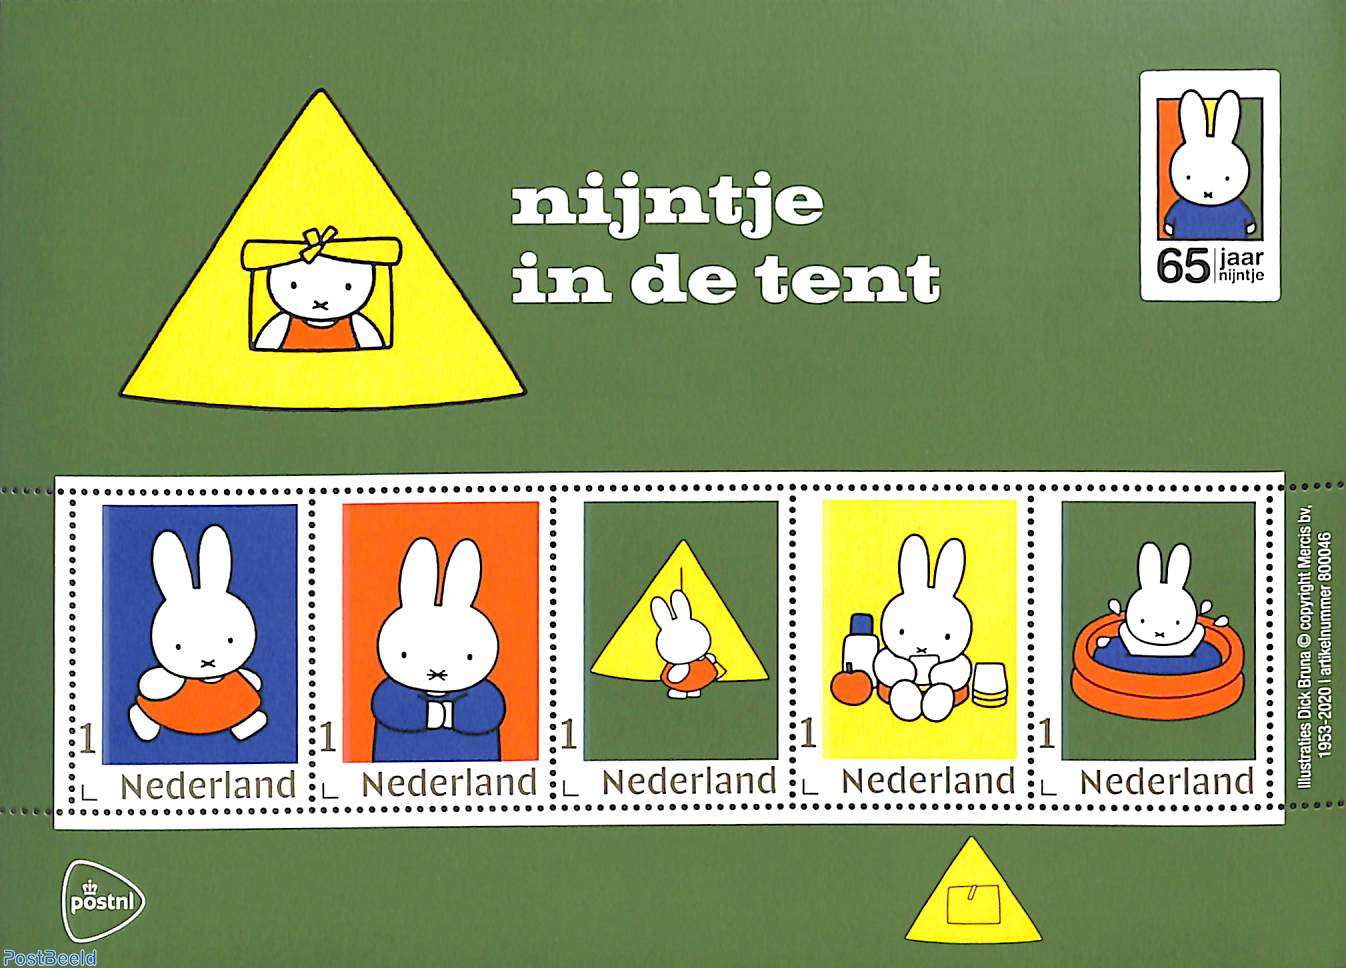 Nucleair Diplomatie Overjas Stamp 2020, Netherlands - Personal stamps TNT/PNL Nijntje in de tent 5v  m/s, 2020 - Collecting Stamps - PostBeeld - Online Stamp Shop - Collecting